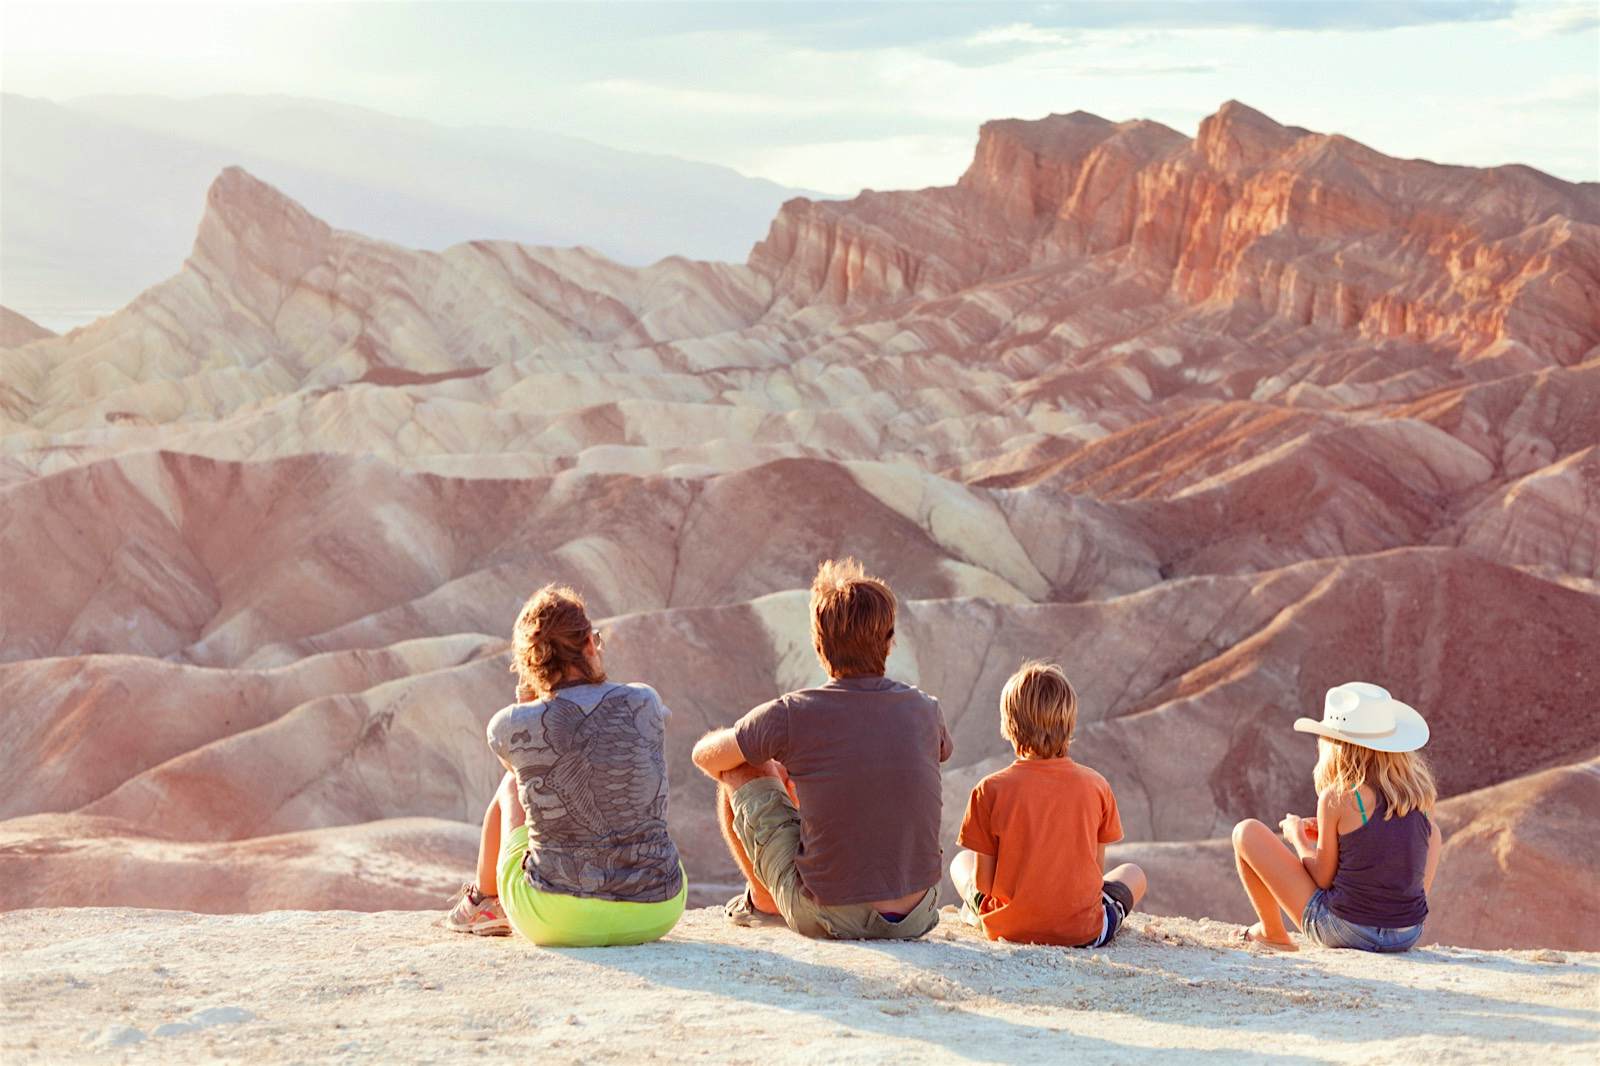 A family of four admires the view at Death Valley